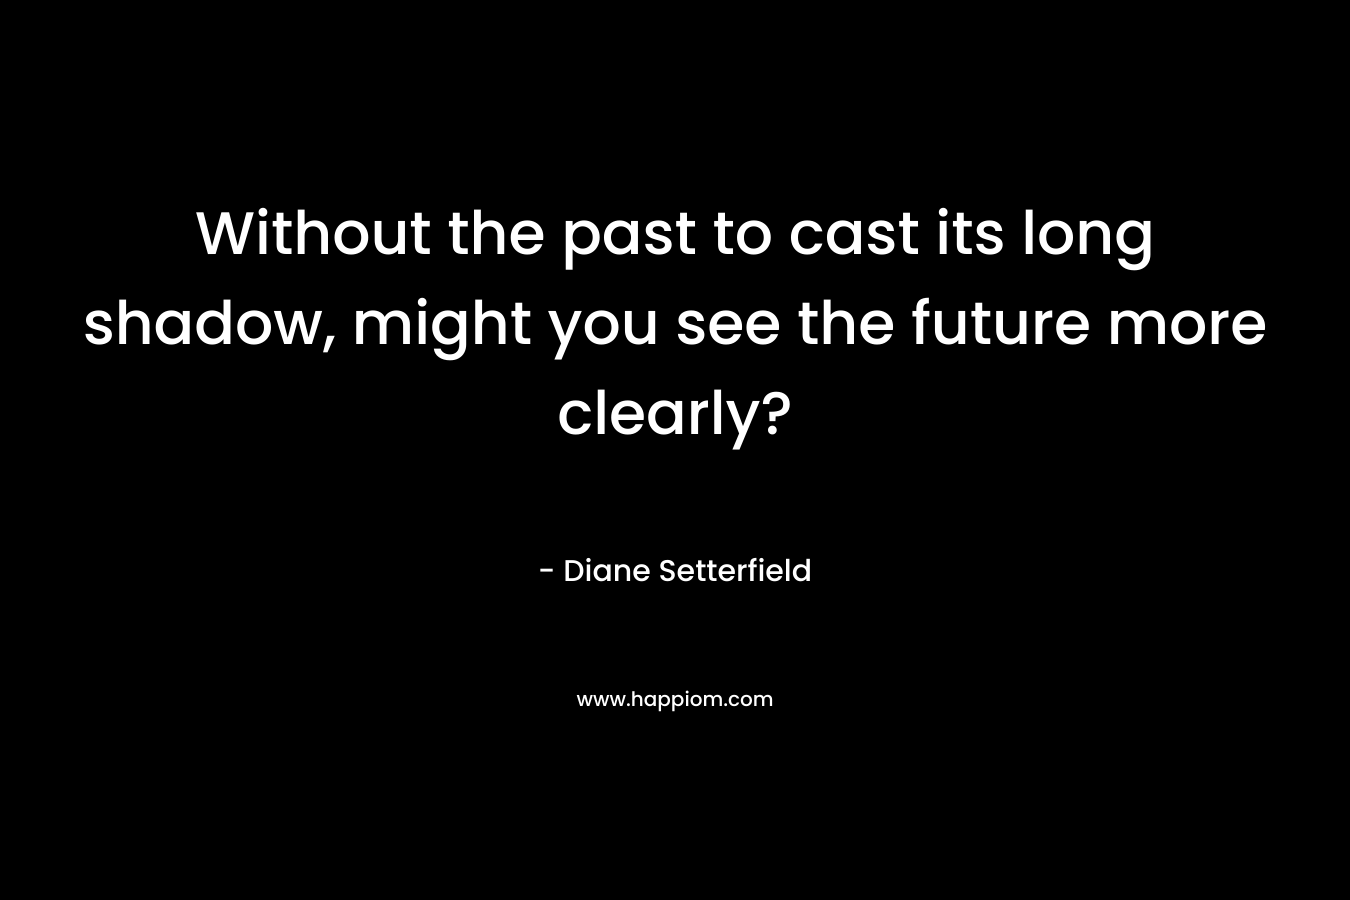 Without the past to cast its long shadow, might you see the future more clearly? – Diane Setterfield